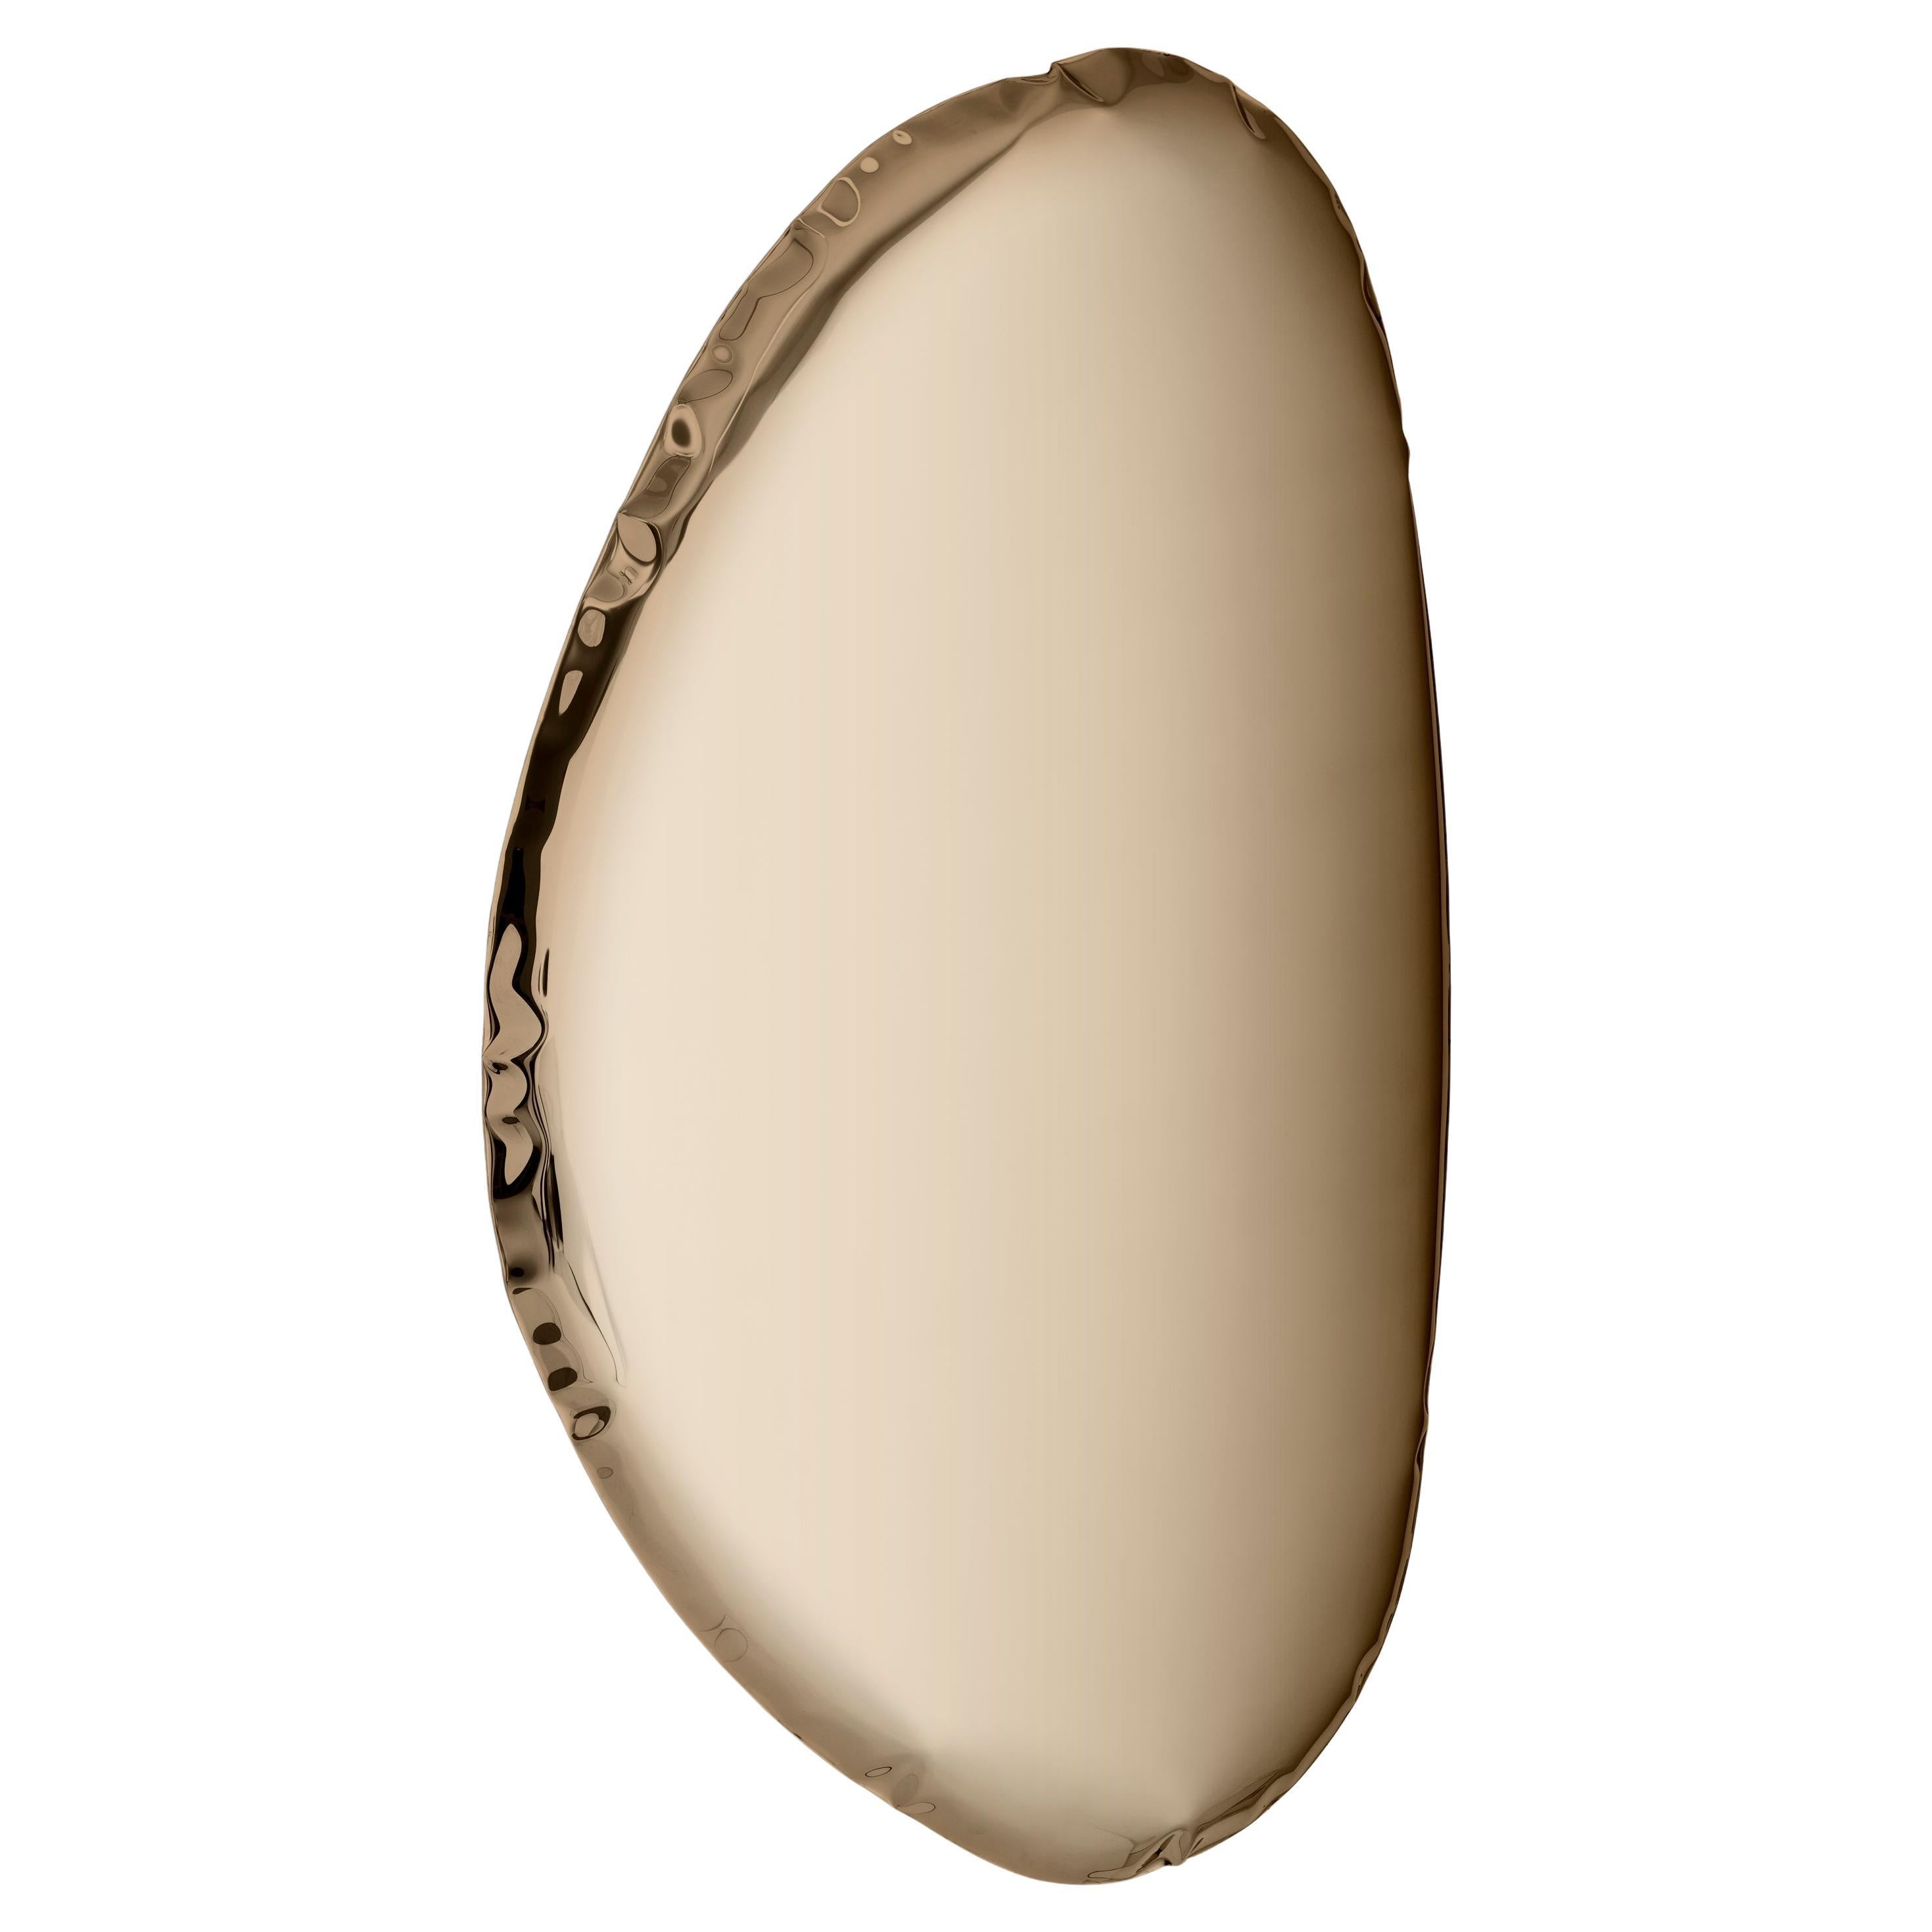 Classic Gold Tafla O3 Wall Mirror by Zieta
Dimensions: D 6 x W 79 x H 124 cm 
Material: Stainless steel.
Finish: Classic gold. 
Available finishes: Stainless Steel, White Matt, Sapphire/Emerald, Sapphire, Emerald, Deep space blue, Dark matter, red